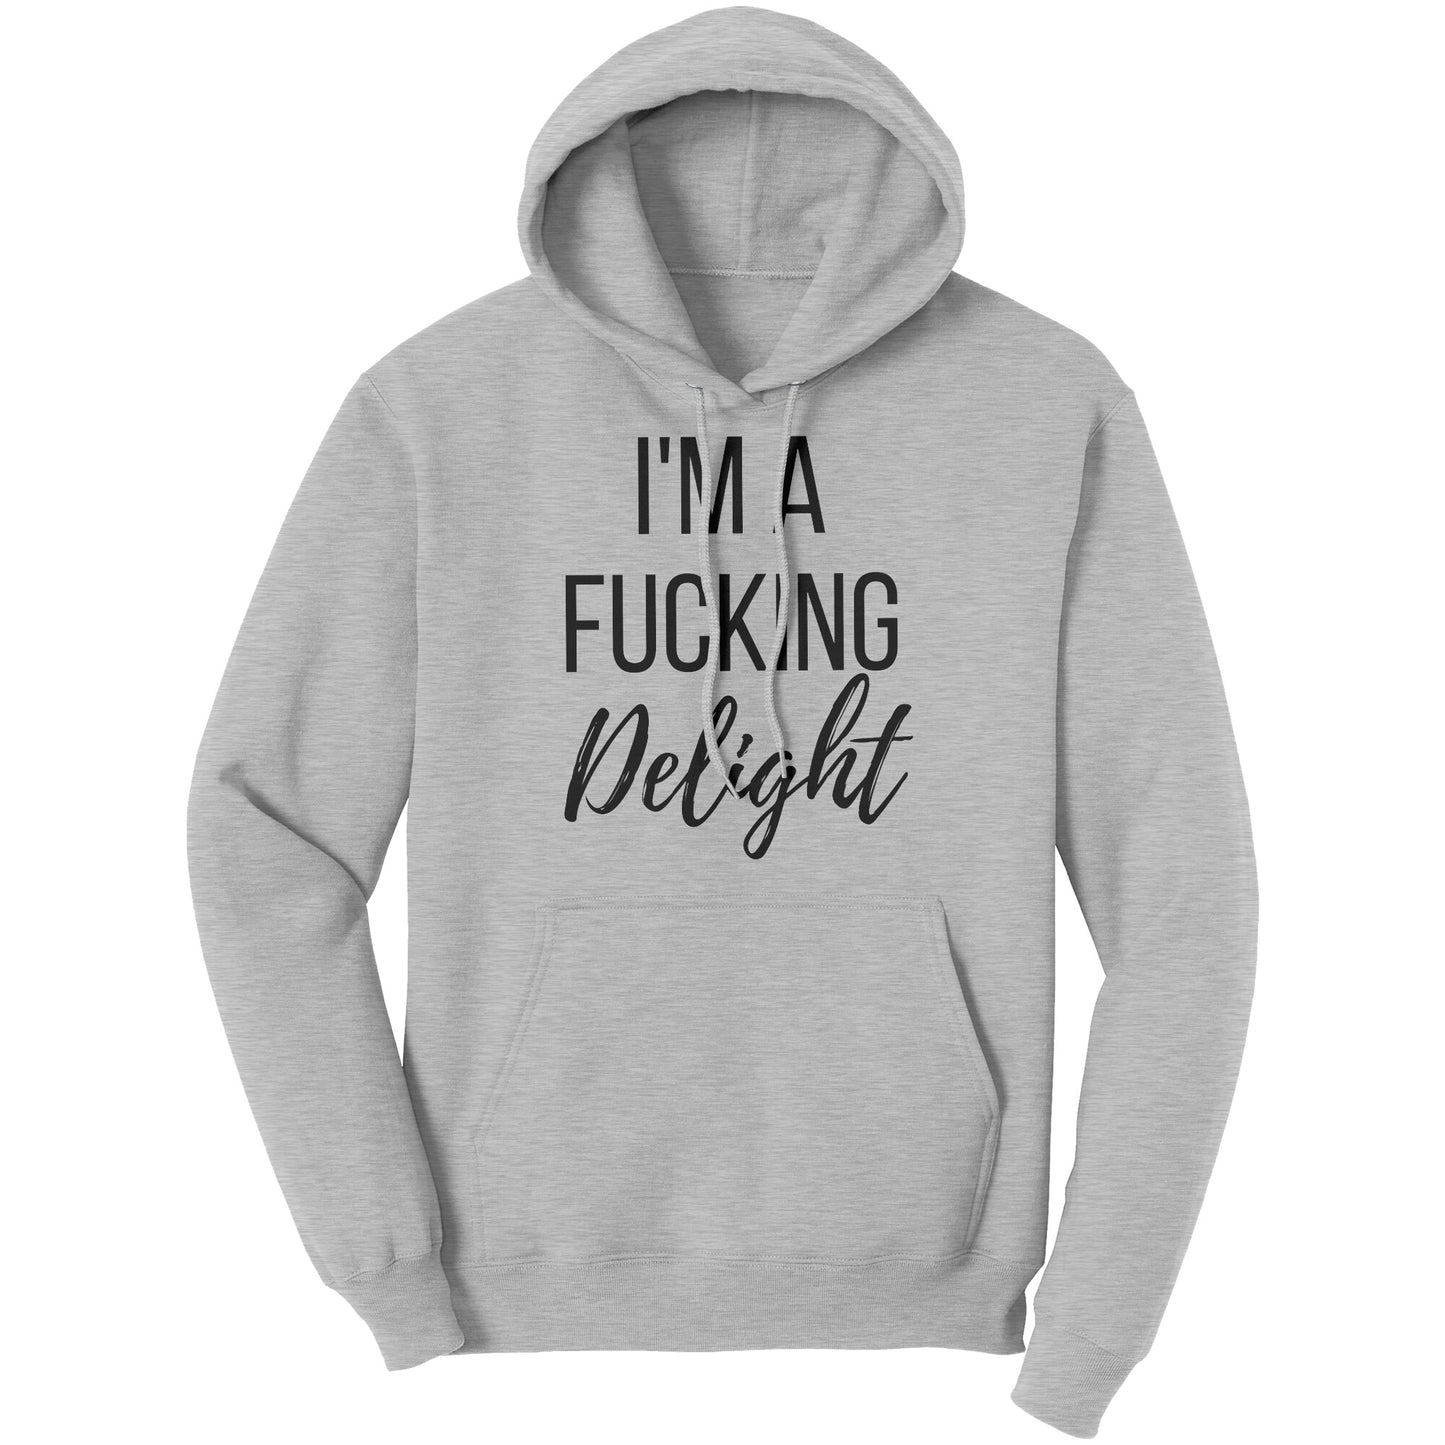 I'm A Delight Hoodie